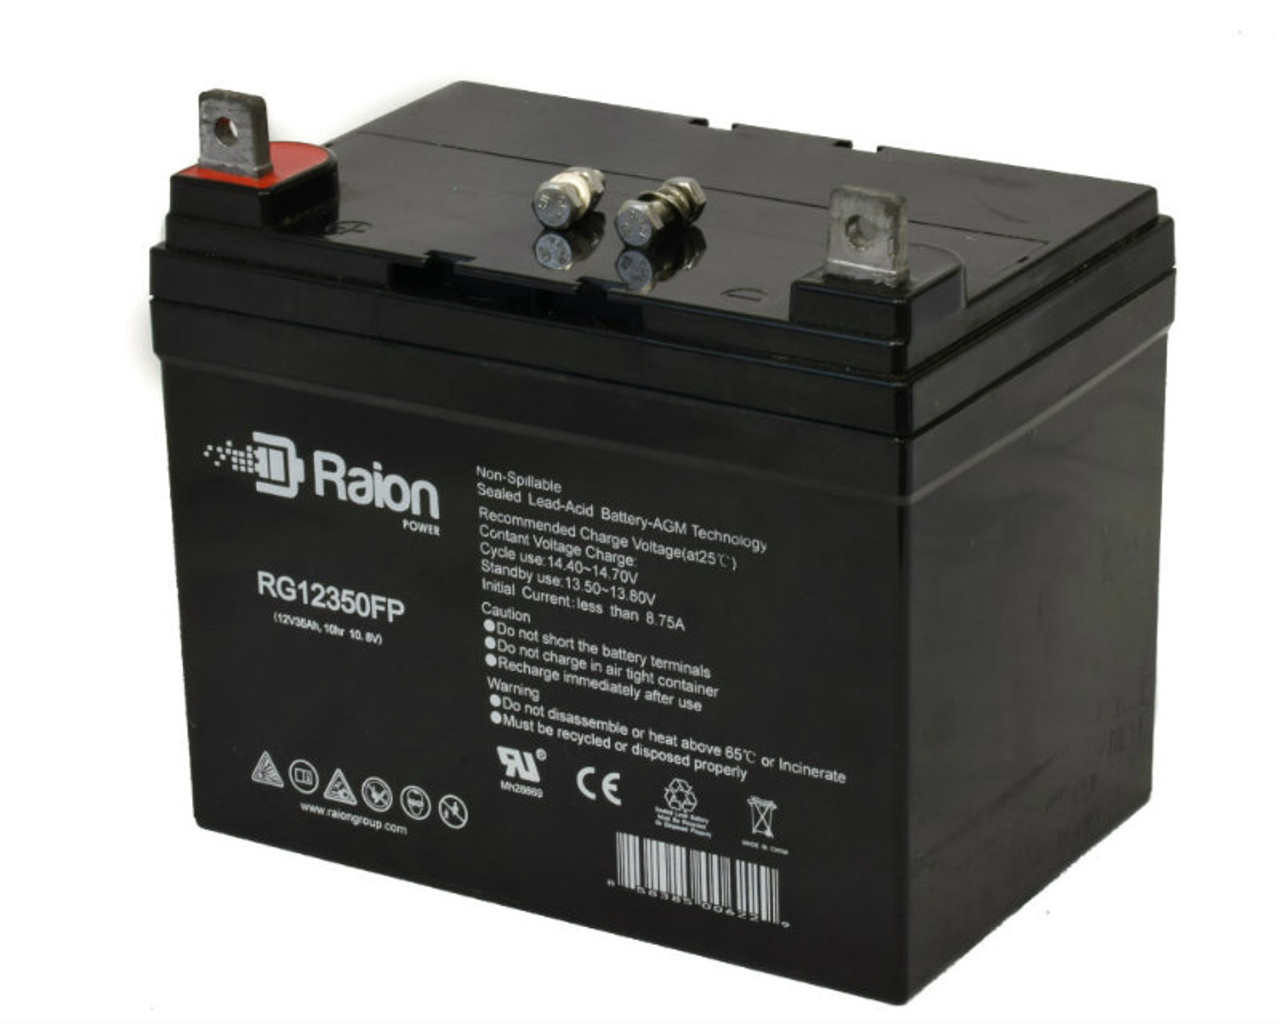 Raion Power Replacement 12V 35Ah Battery for Cub Cadet 1212 - 1 Pack